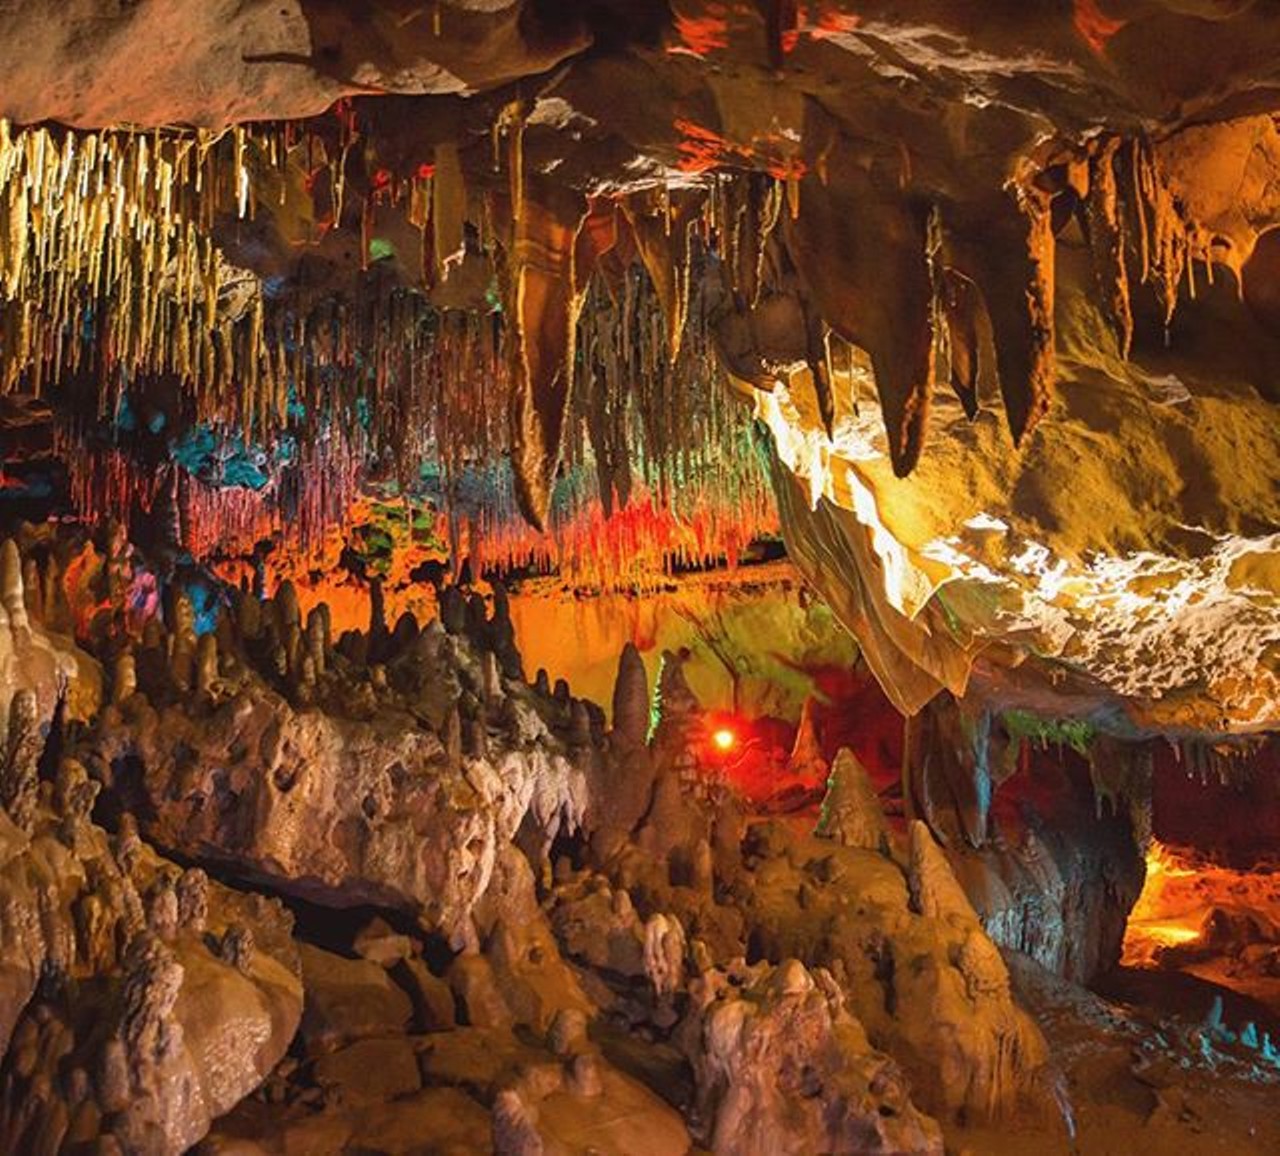 Florida Caverns State Park
3345 Caverns Road, Marianna, Fla. 32446 | 850-482-1228
One of Florida&#146;s only state parks with dry caves features some elaborate limestone formations and rock draperies. Considering Florida rests at sea-level, there aren&#146;t many other places to go cave exploring, so consider this state park a diamond in the rough. And if you need a breath of fresh air after caving, check out their New Deal-era golf course.
Photo via focusedviews on Instagram